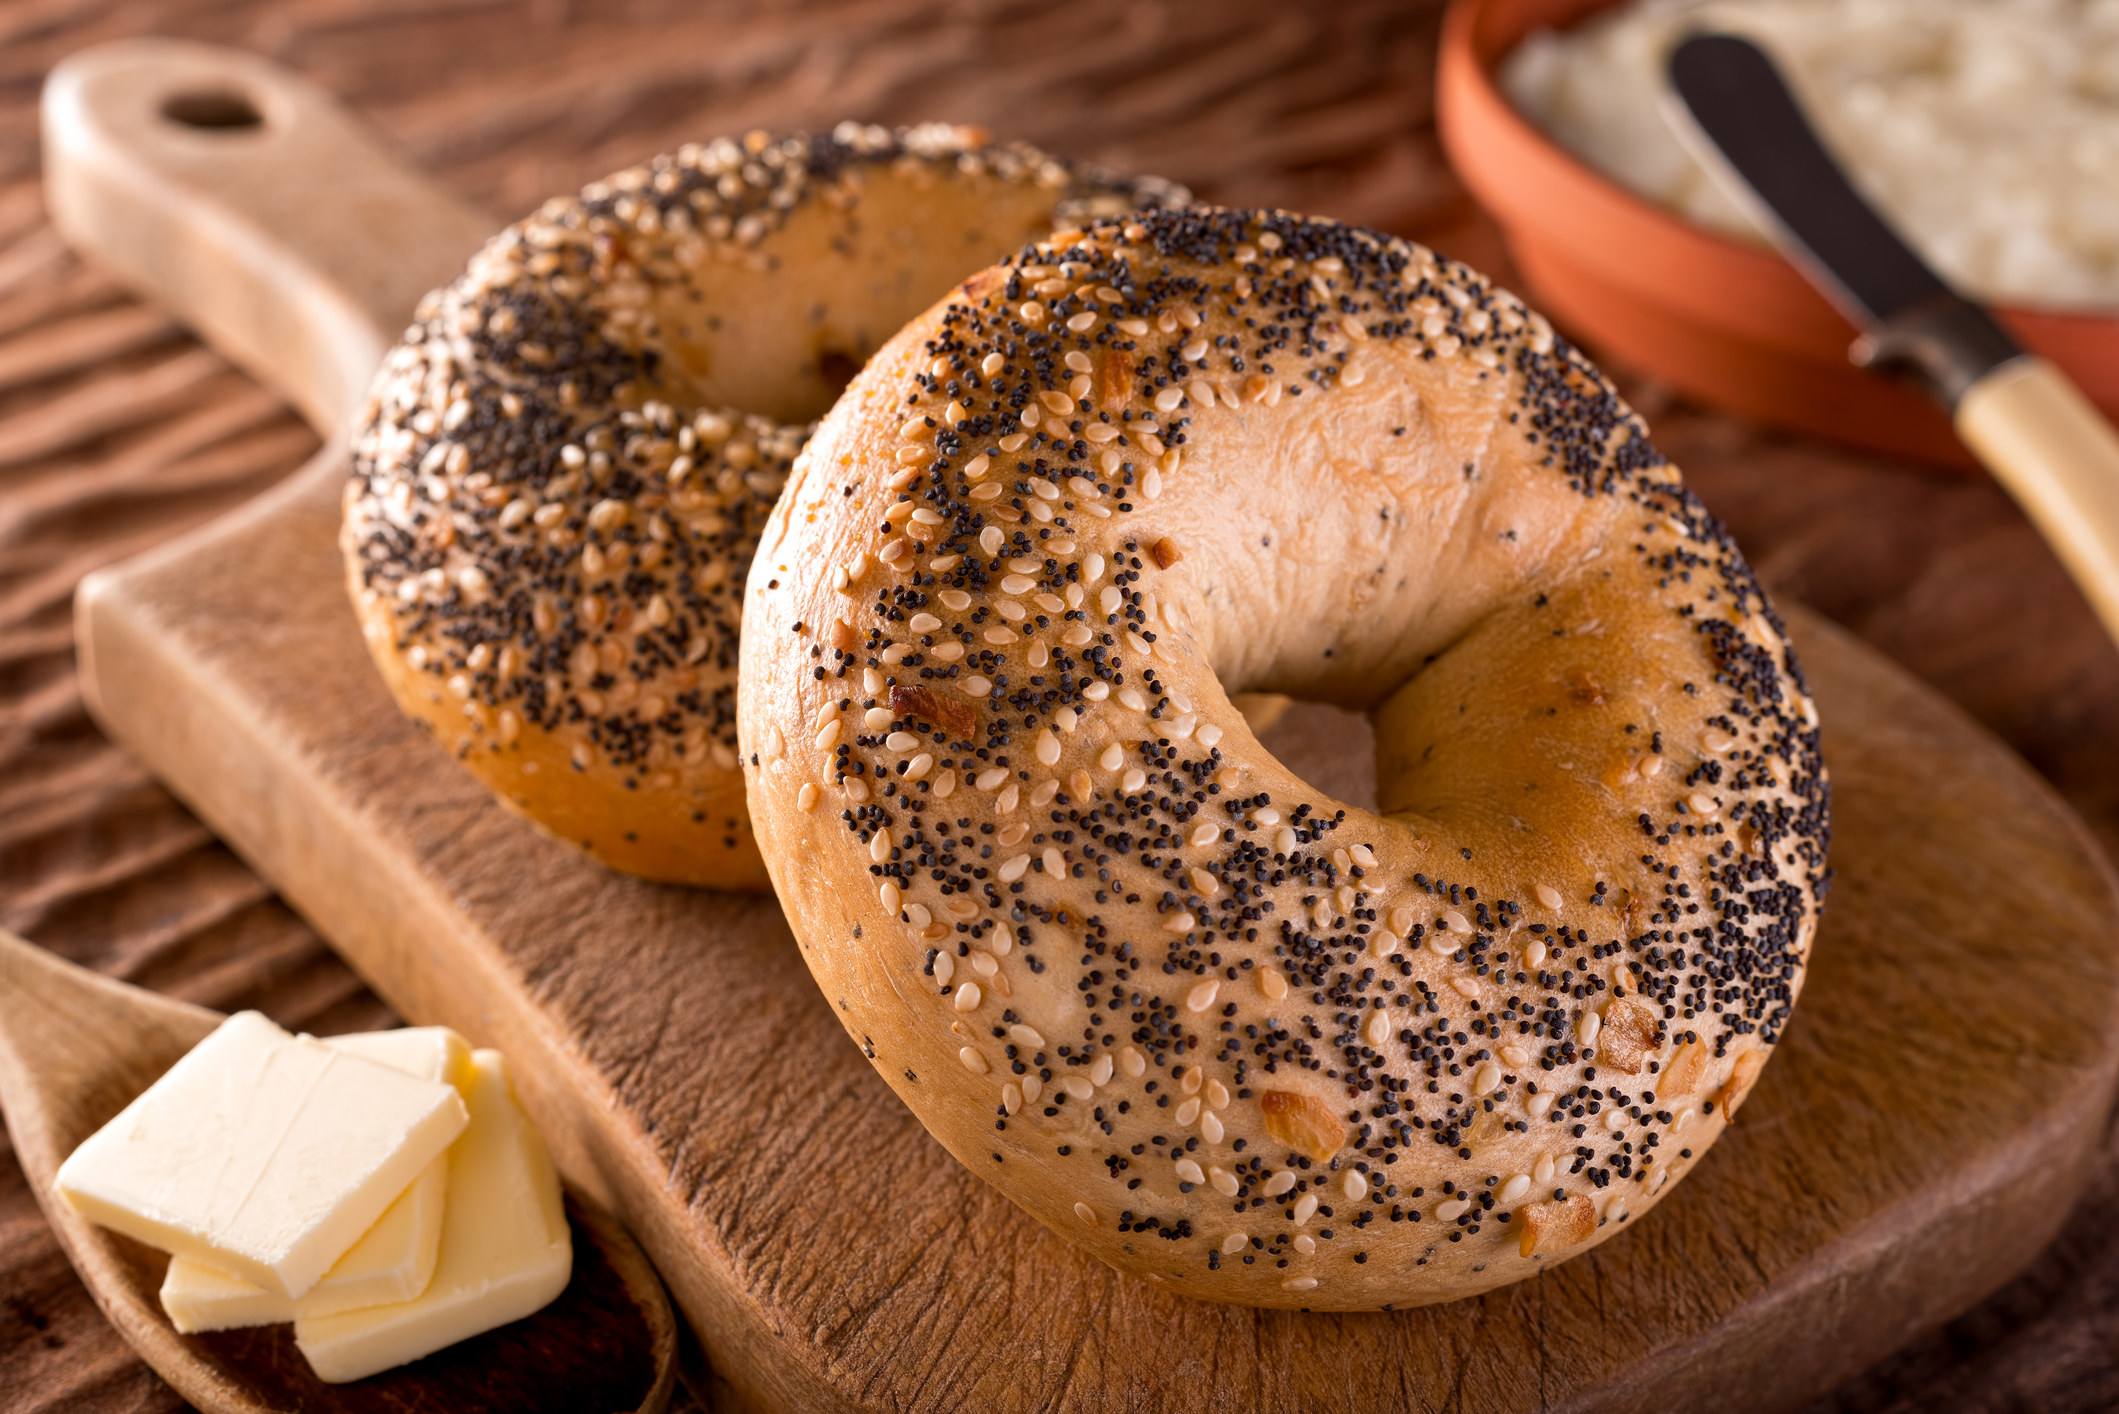 Two everything bagels